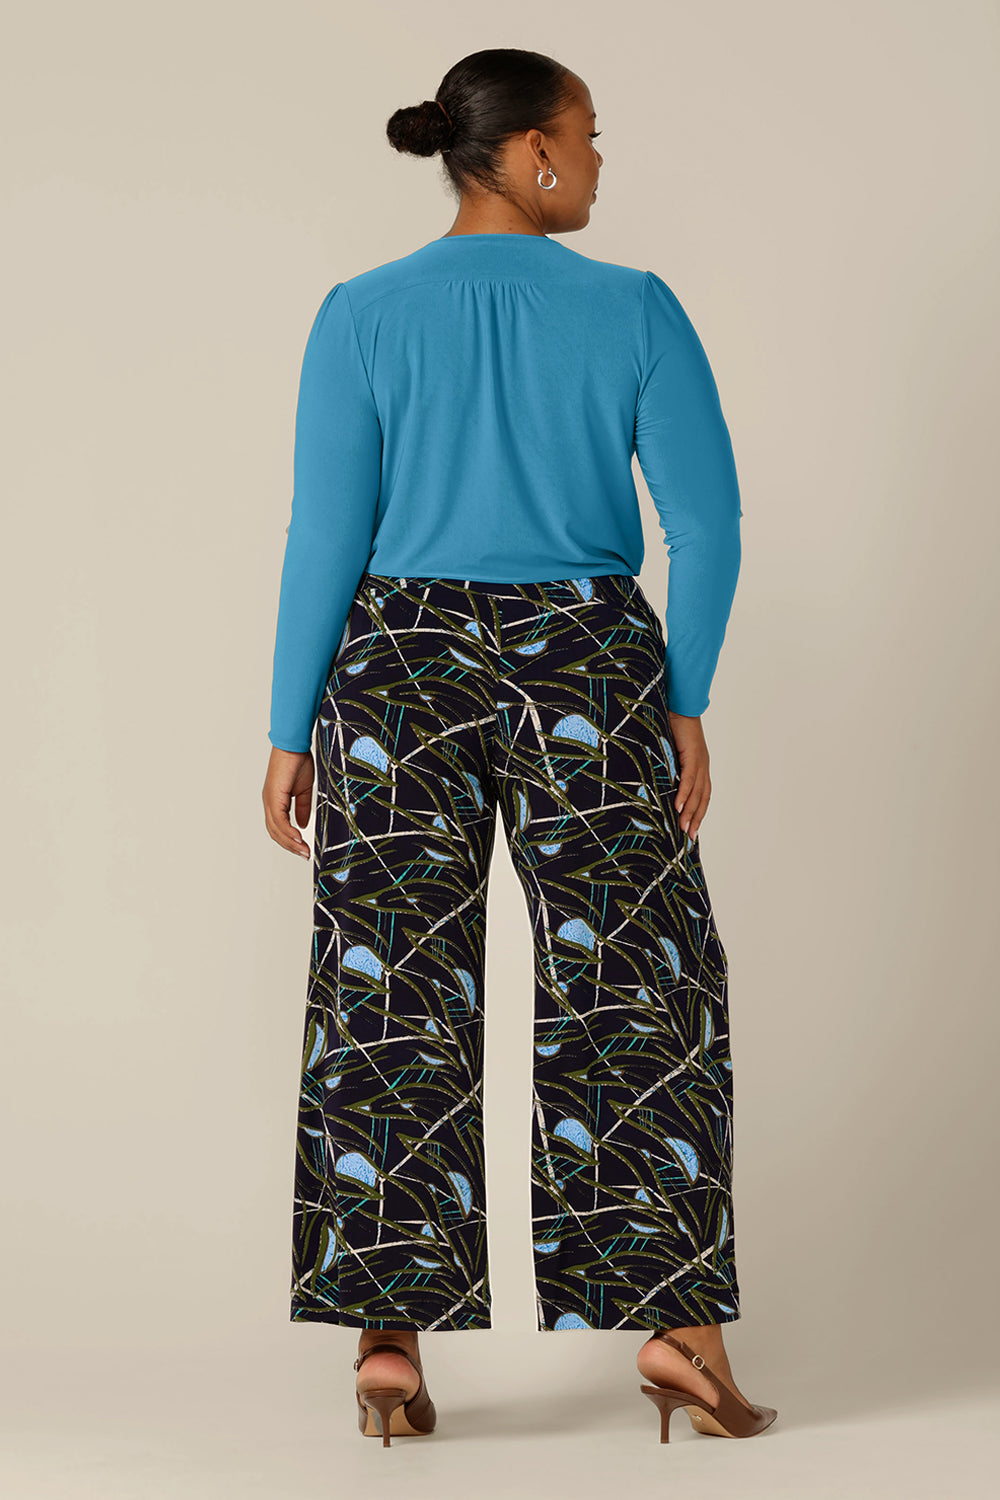 Back view of Australian-made, wide-leg pants by Australian and New Zealand women's clothing brand, L&F. Featuring a blue, green and white abstract print on navy-base jersey, these stretch-fit wide leg trousers wear well for workwear or casual wear.